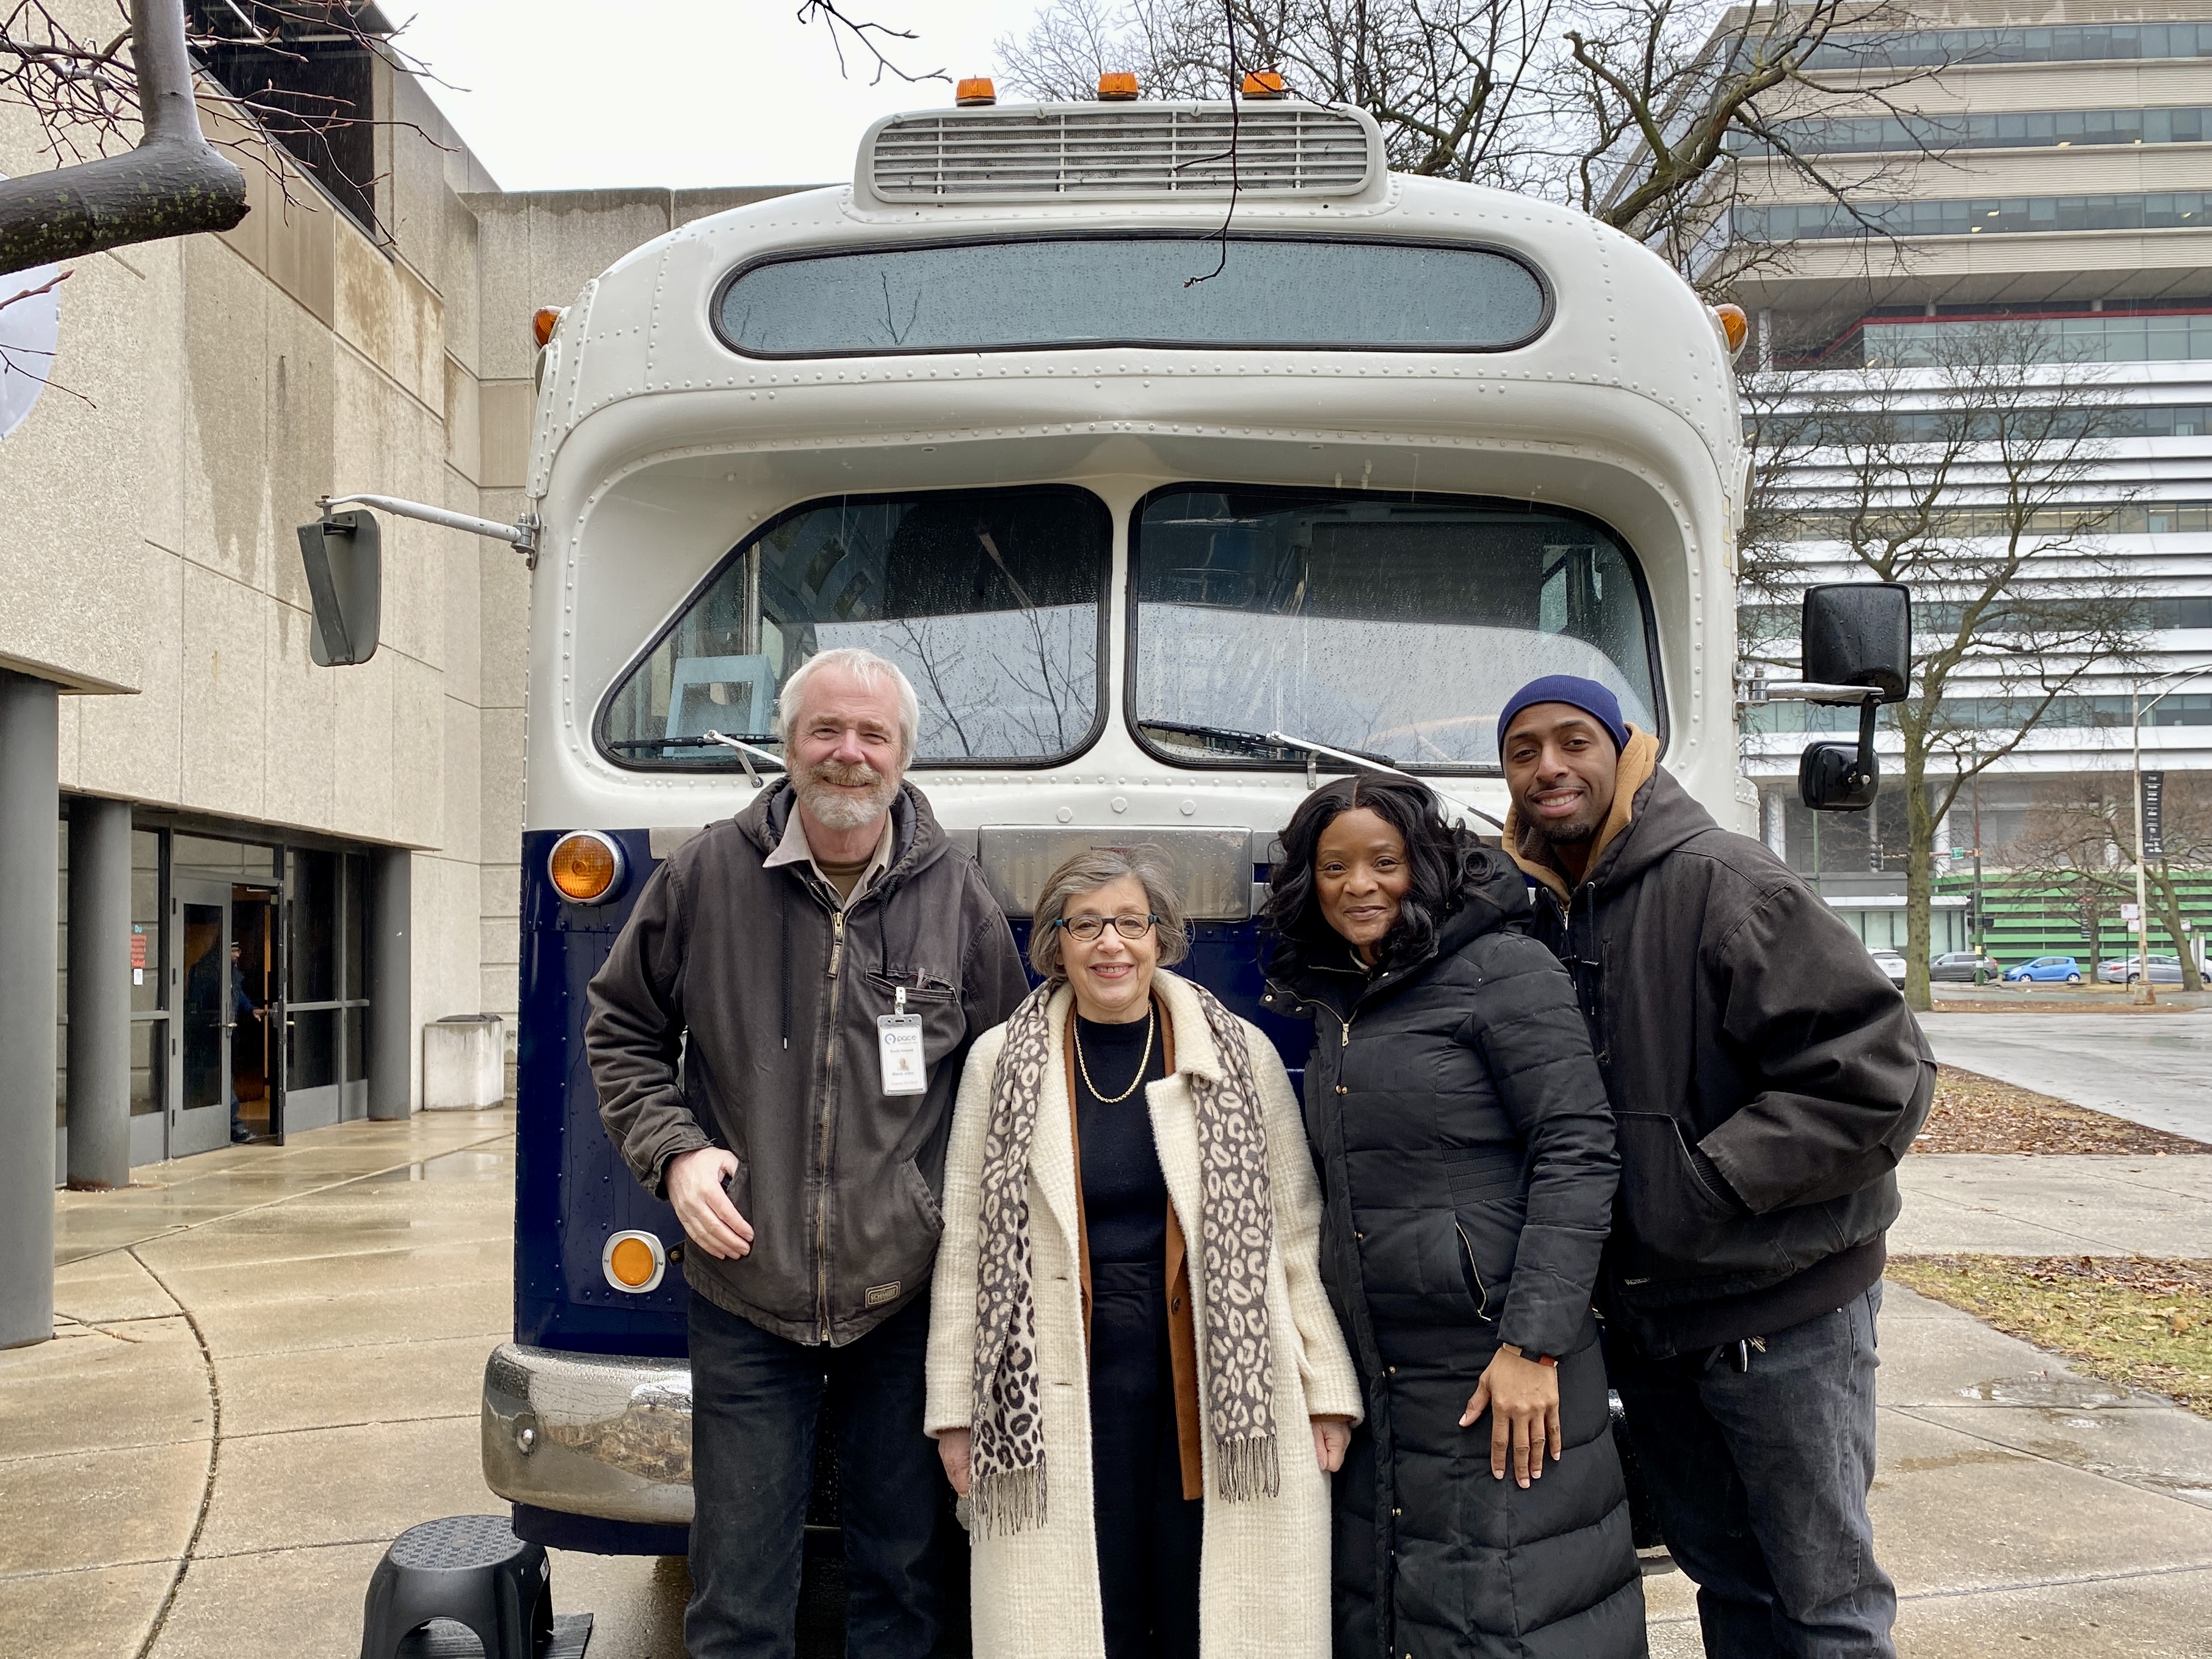 Pace staff with vintage bus outside museum